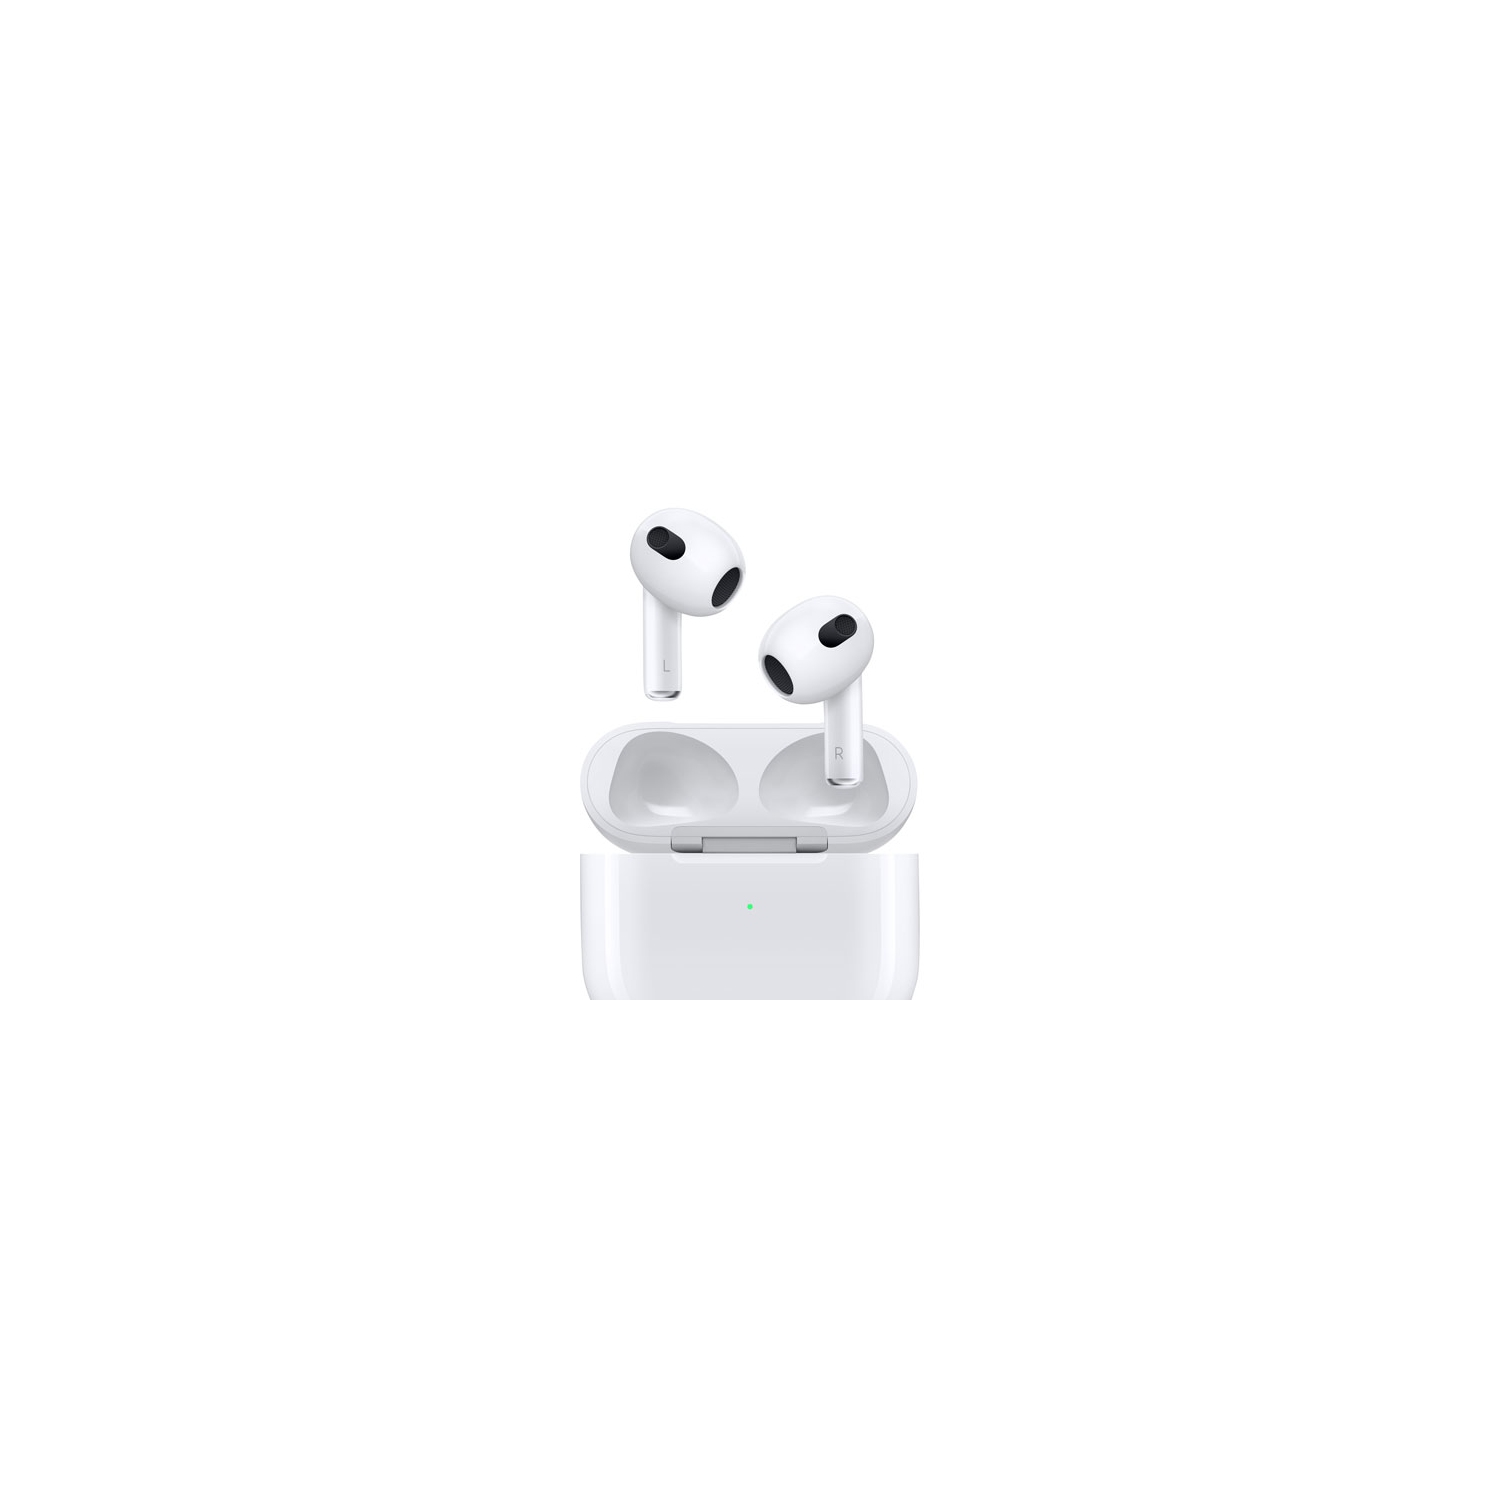 Refurbished (Excellent) - Apple AirPods (3rd generation) In-Ear True Wireless Earbuds with Lightning Charging Case - White